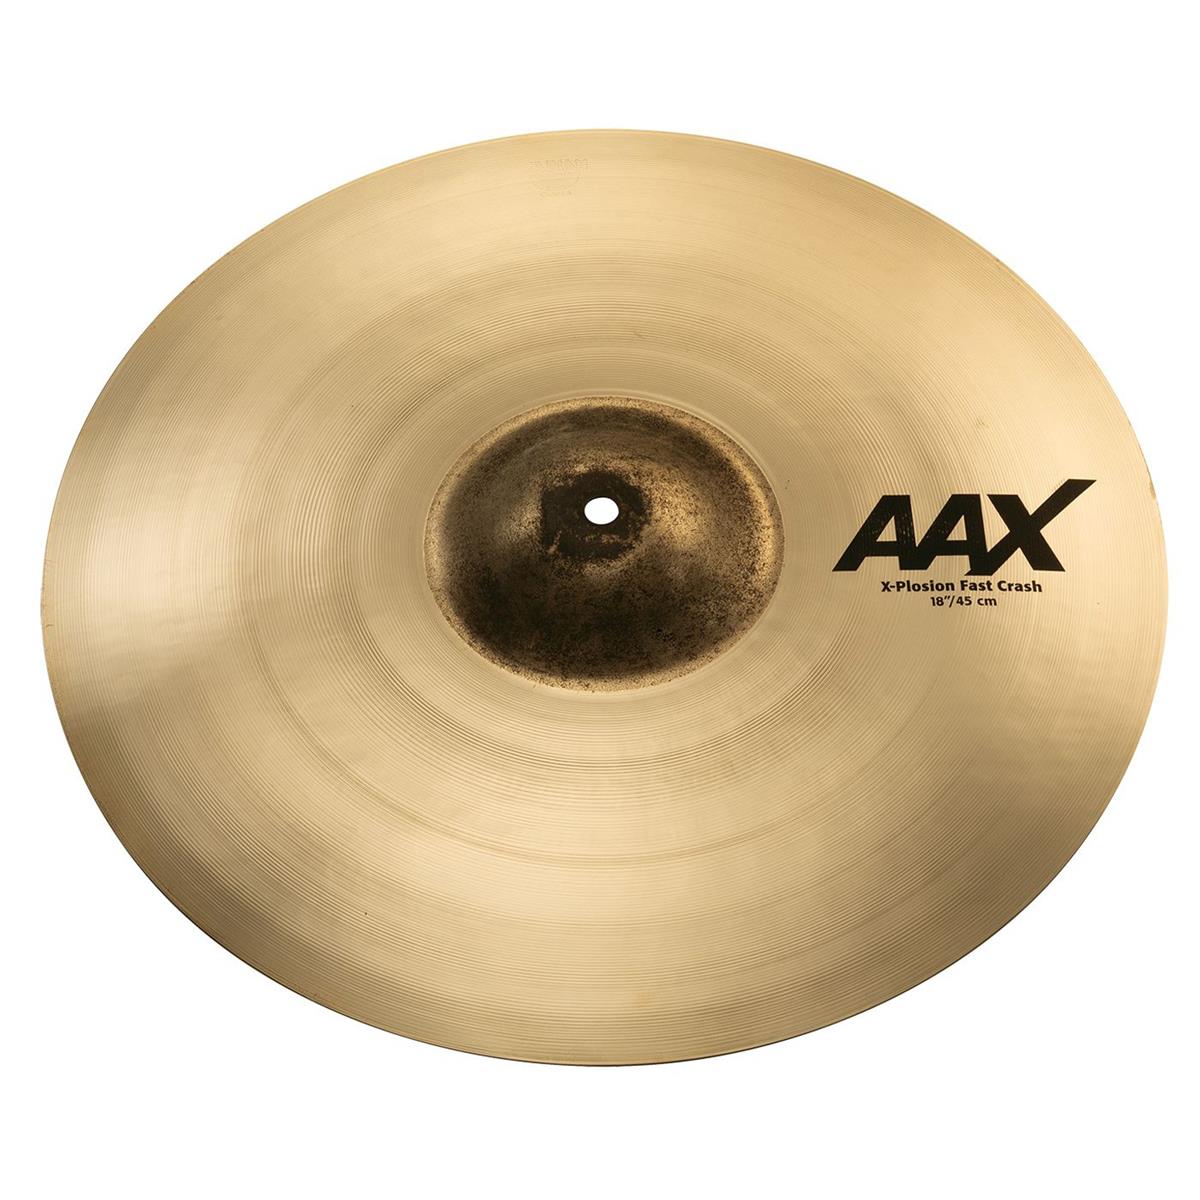 Sabian 18" AAX X-Plosion Fast Crash Cymbal, Extra-Thin, Brilliant Finish Super-fast, with full, explosive response, the SABIAN 18" AAX X-Plosion Fast Crash redefines the power potential for Tuner cymbals with even faster, punchier accents at all volume levels. The SABIAN AAX series delivers consistently bright, crisp, clear and cutting responses - AAX is the ultimate Modern Bright sound!